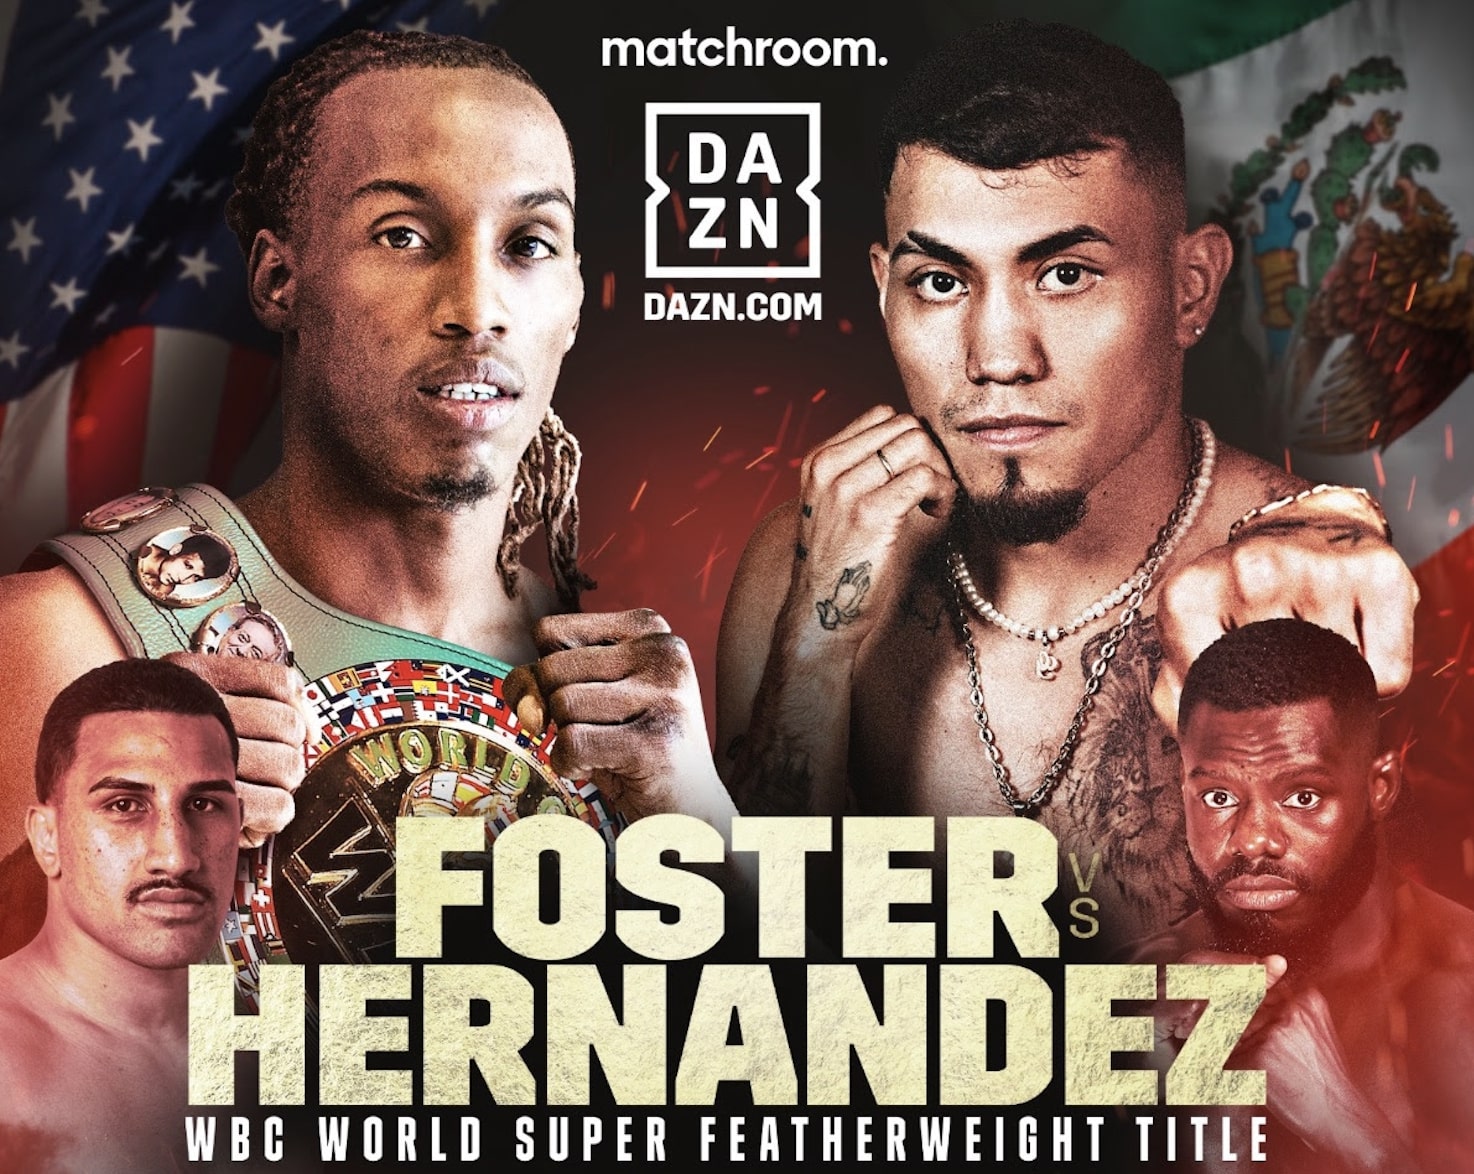 O'Shaquie Foster and Eduardo Hernandez clash in Cancun on October 28